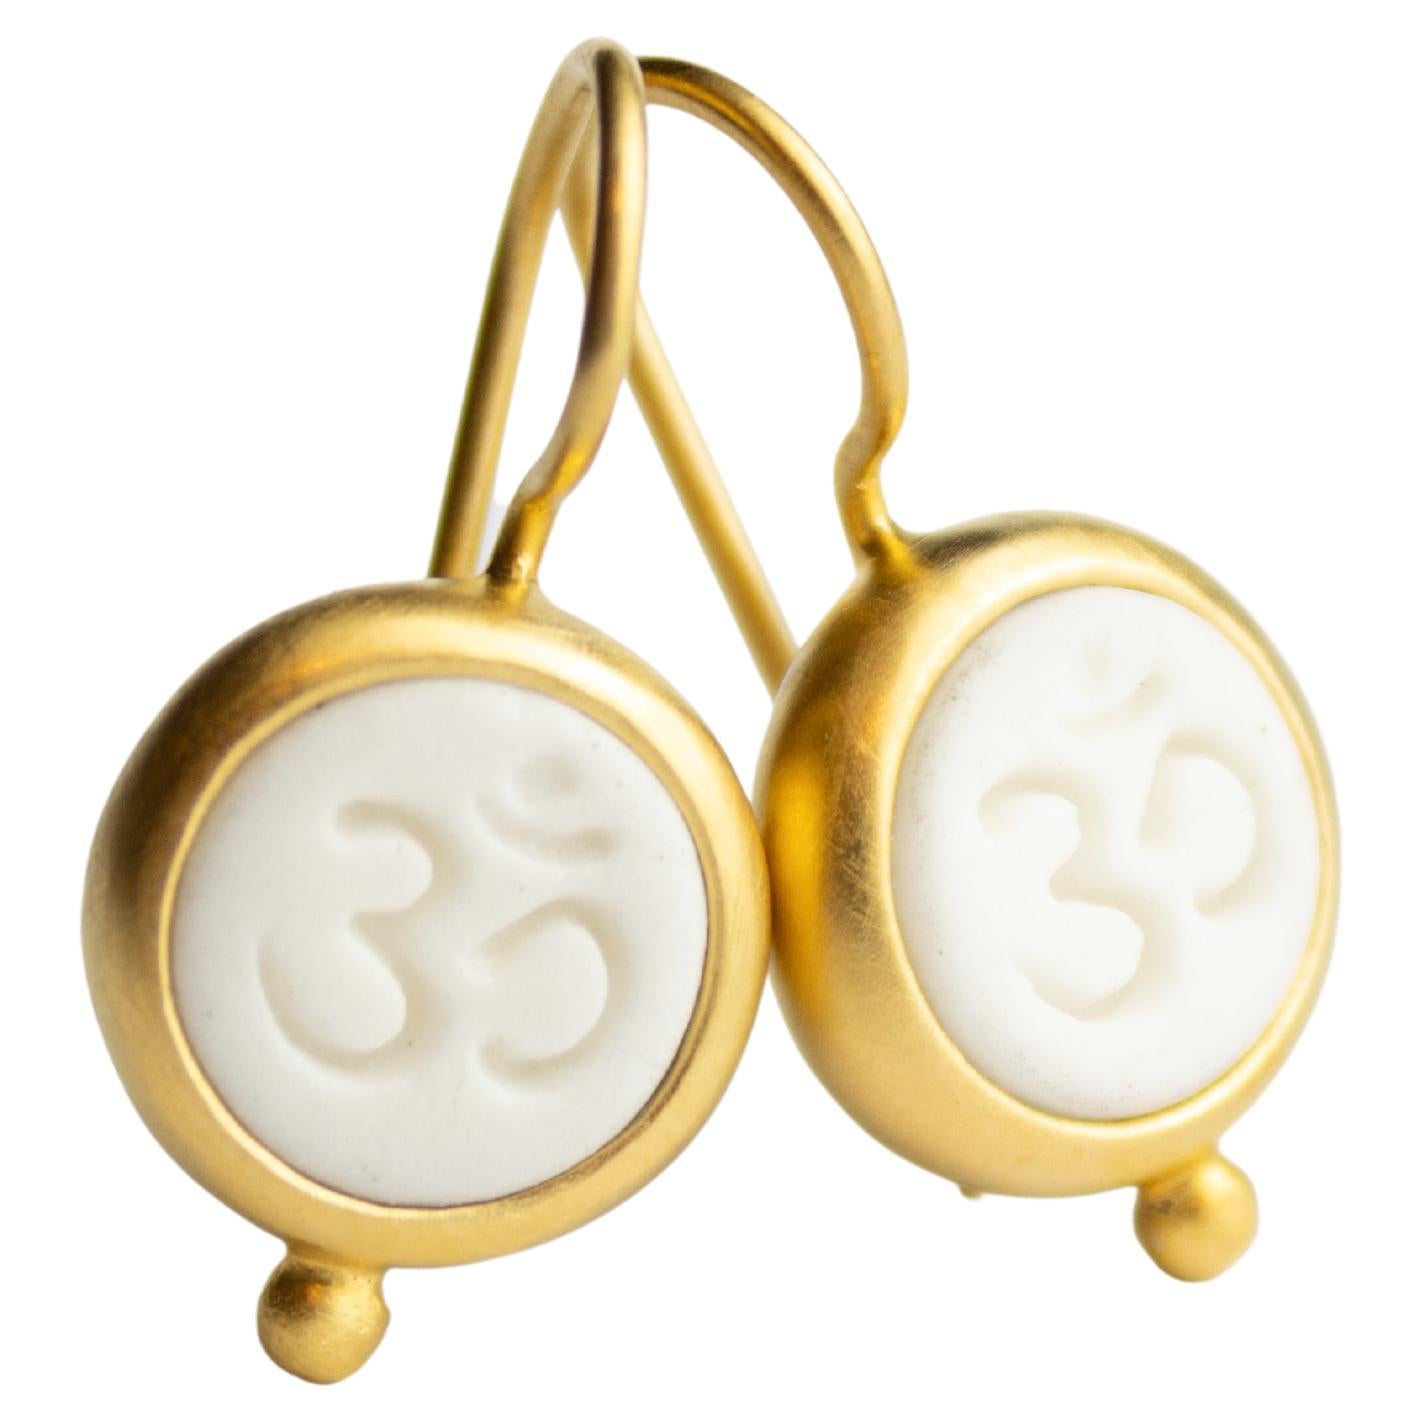 Monika Herré Porcelain Earrings OHM Symbol Sterling Silver gold-plated For Sale